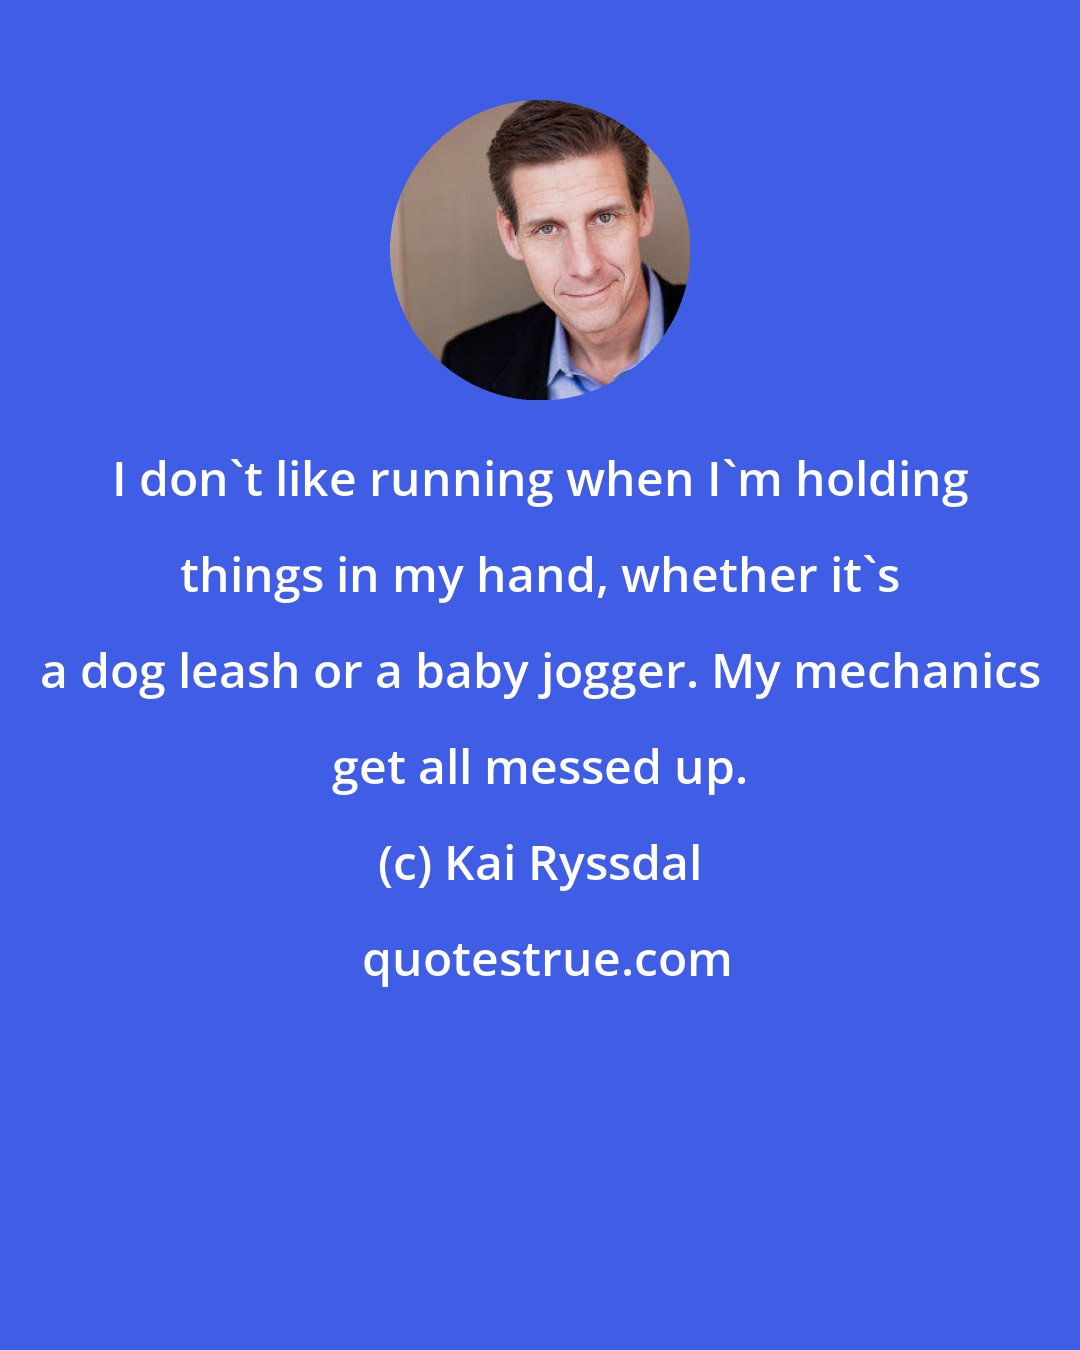 Kai Ryssdal: I don't like running when I'm holding things in my hand, whether it's a dog leash or a baby jogger. My mechanics get all messed up.